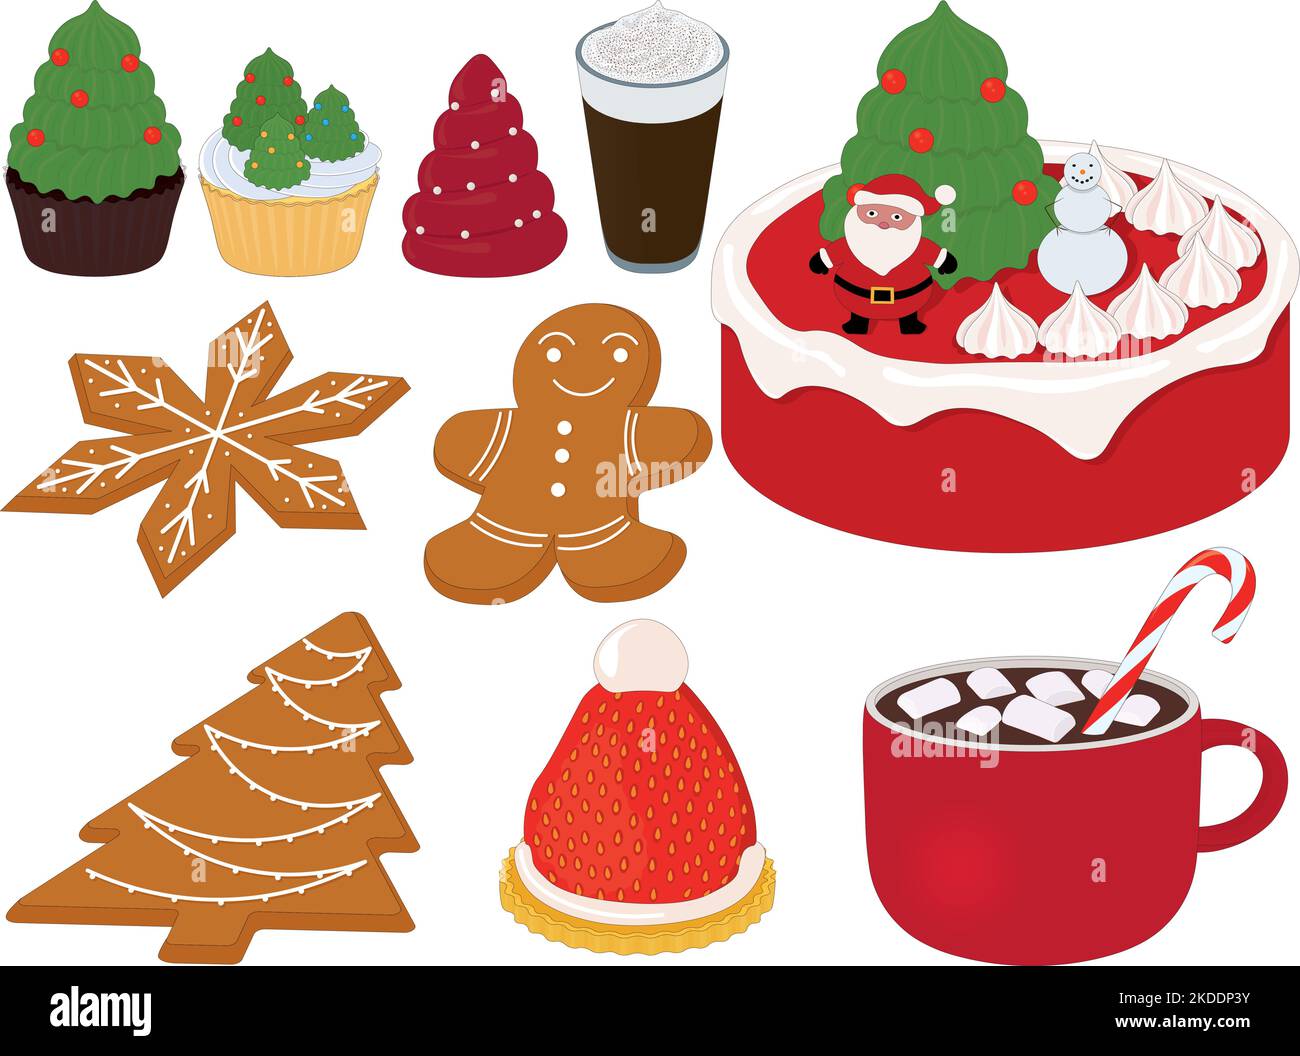 Christmas and new year themed desserts collection vector illustration Stock Vector